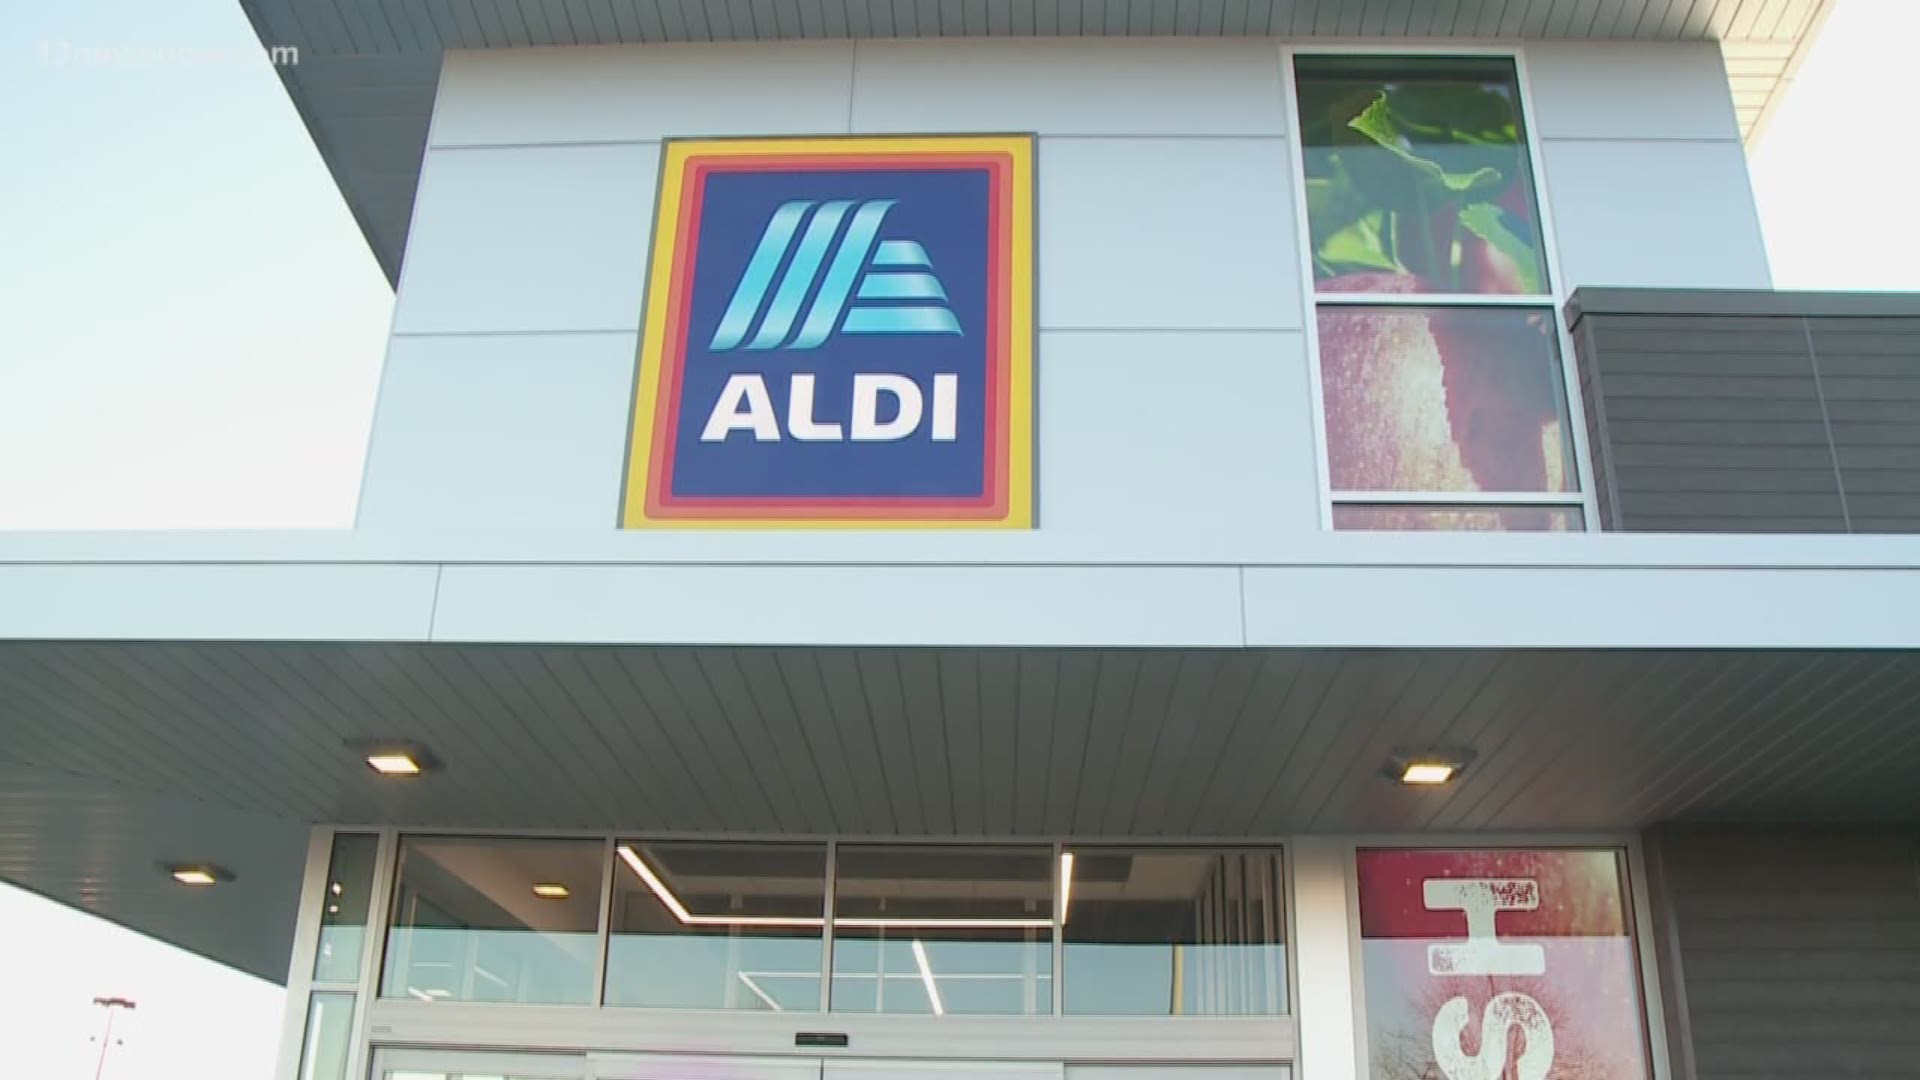 The very first ALDI is open for business in Norfolk. The Military Highway location is the first of two store expected to open in the city.